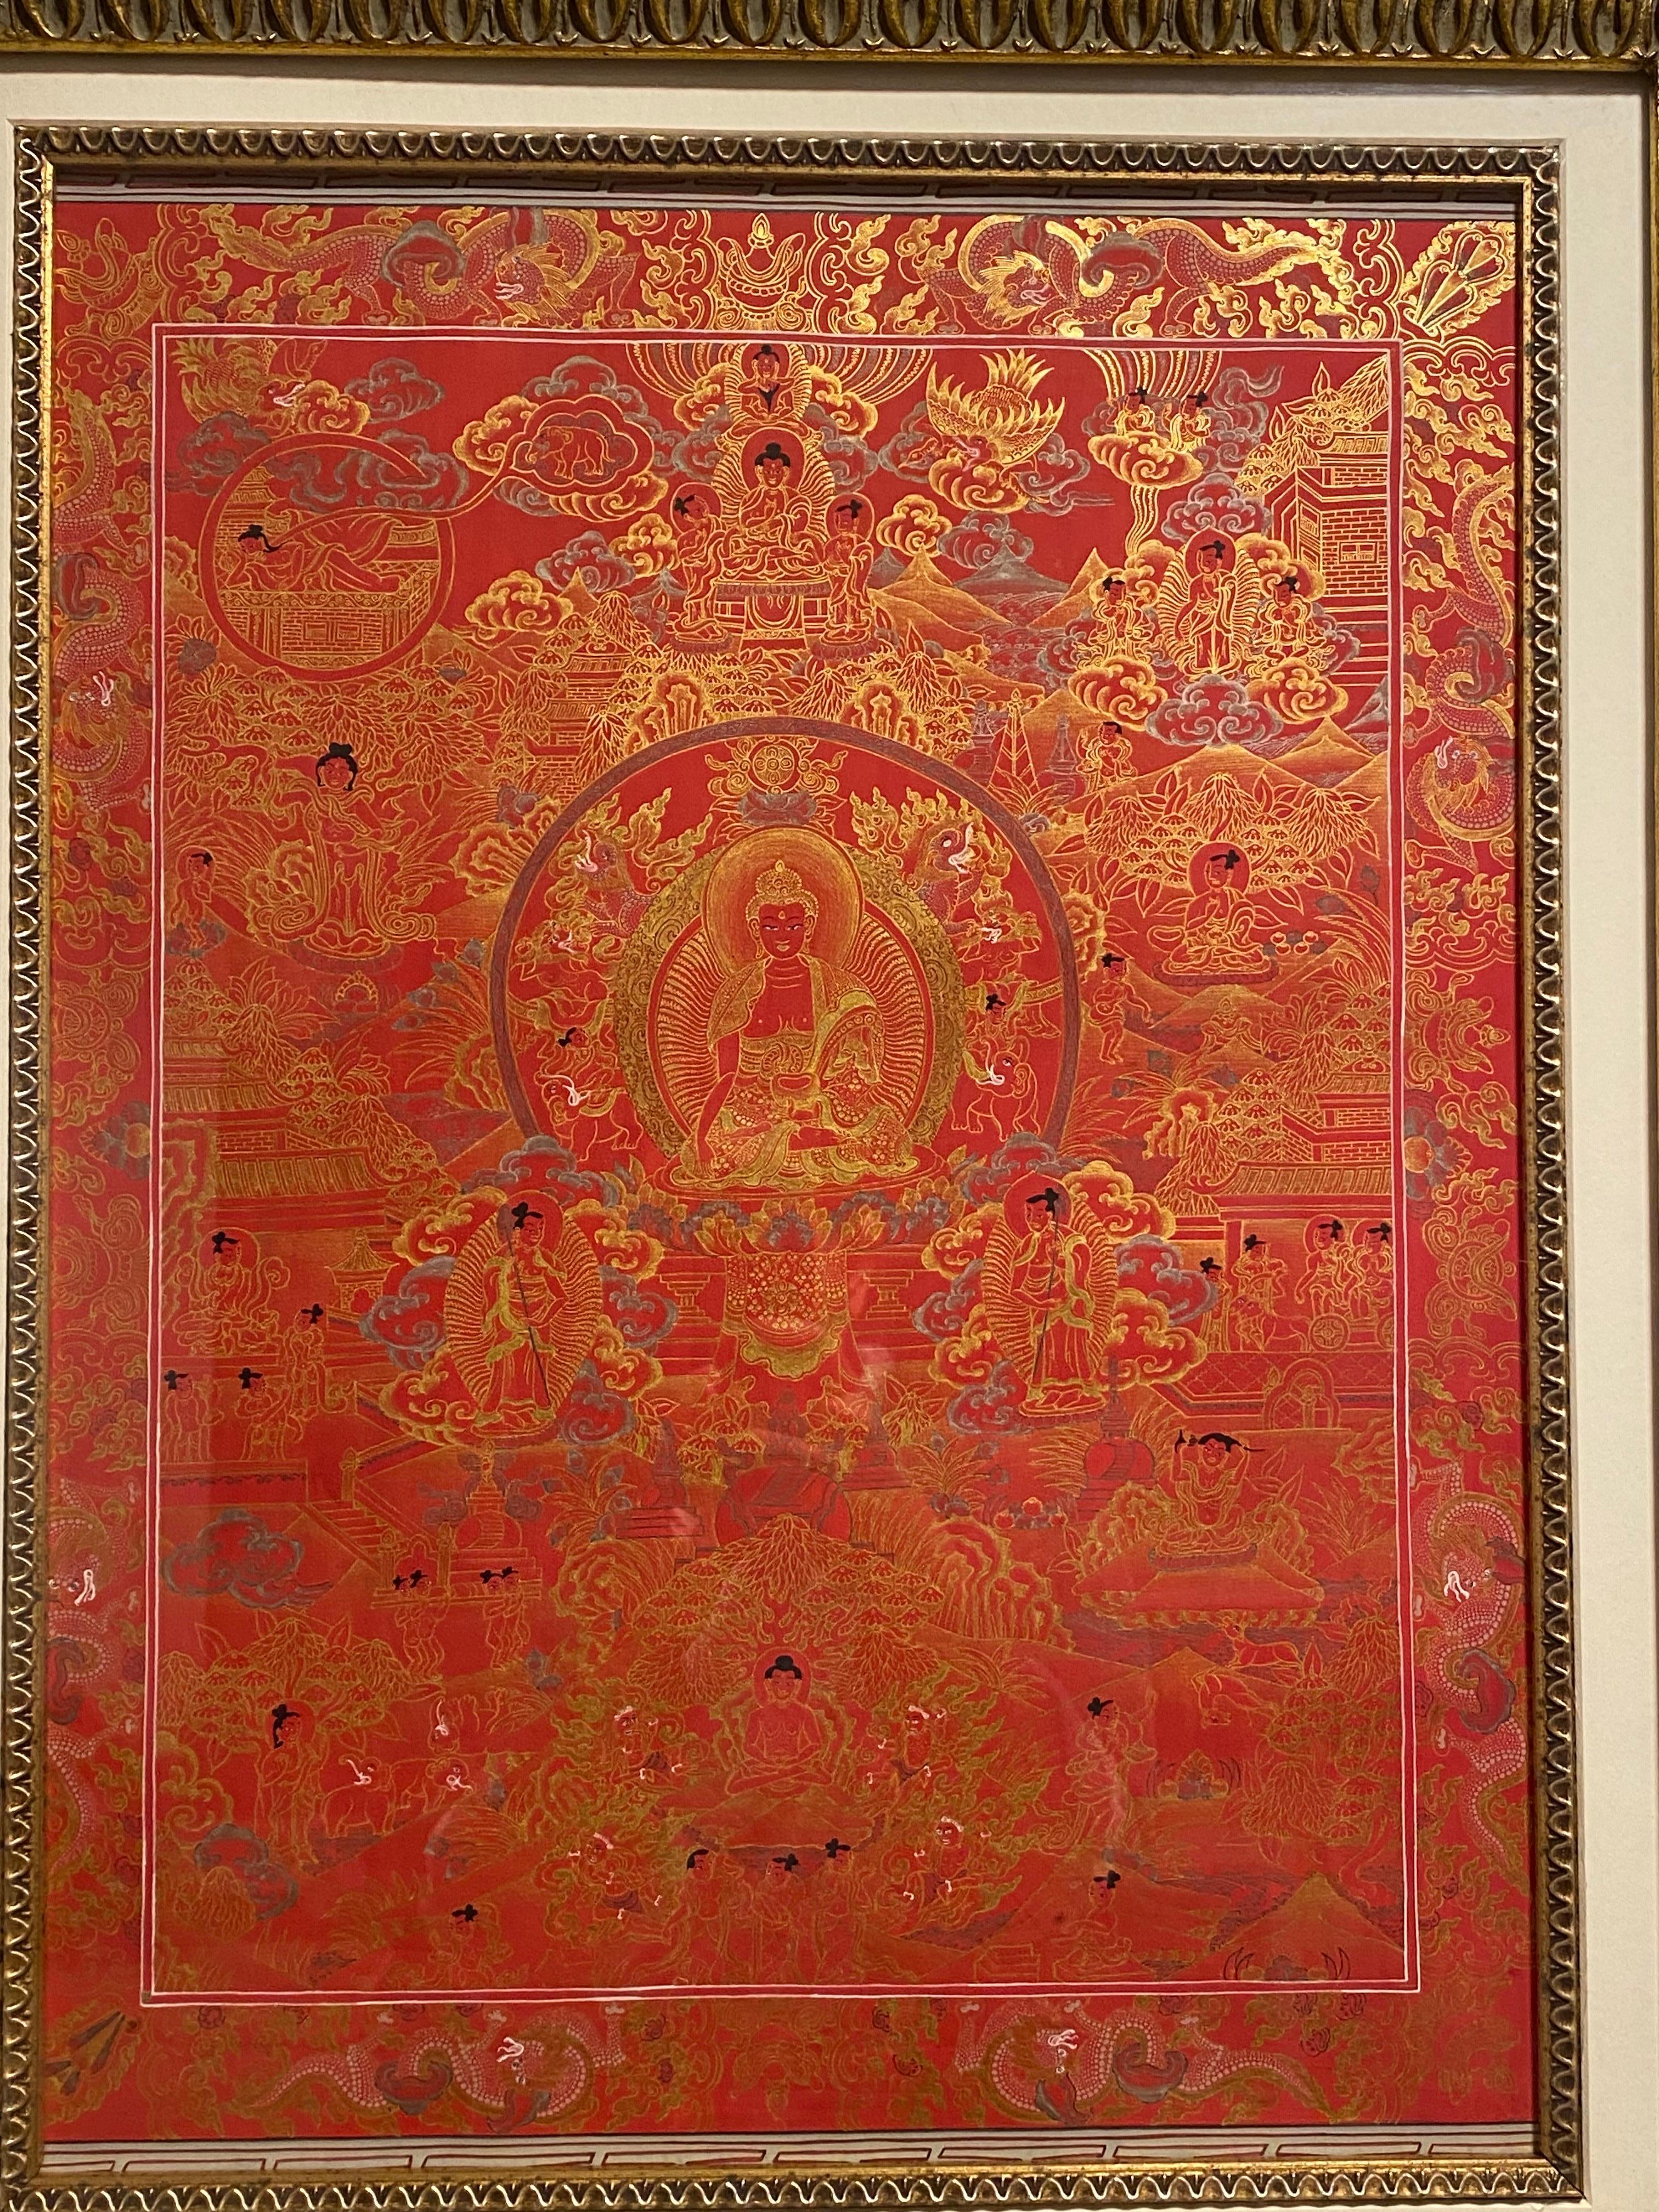 Framed Hand Painted on Canvas Life History of Buddha Thangka 24K Gold - Other Art Style Painting by Unknown